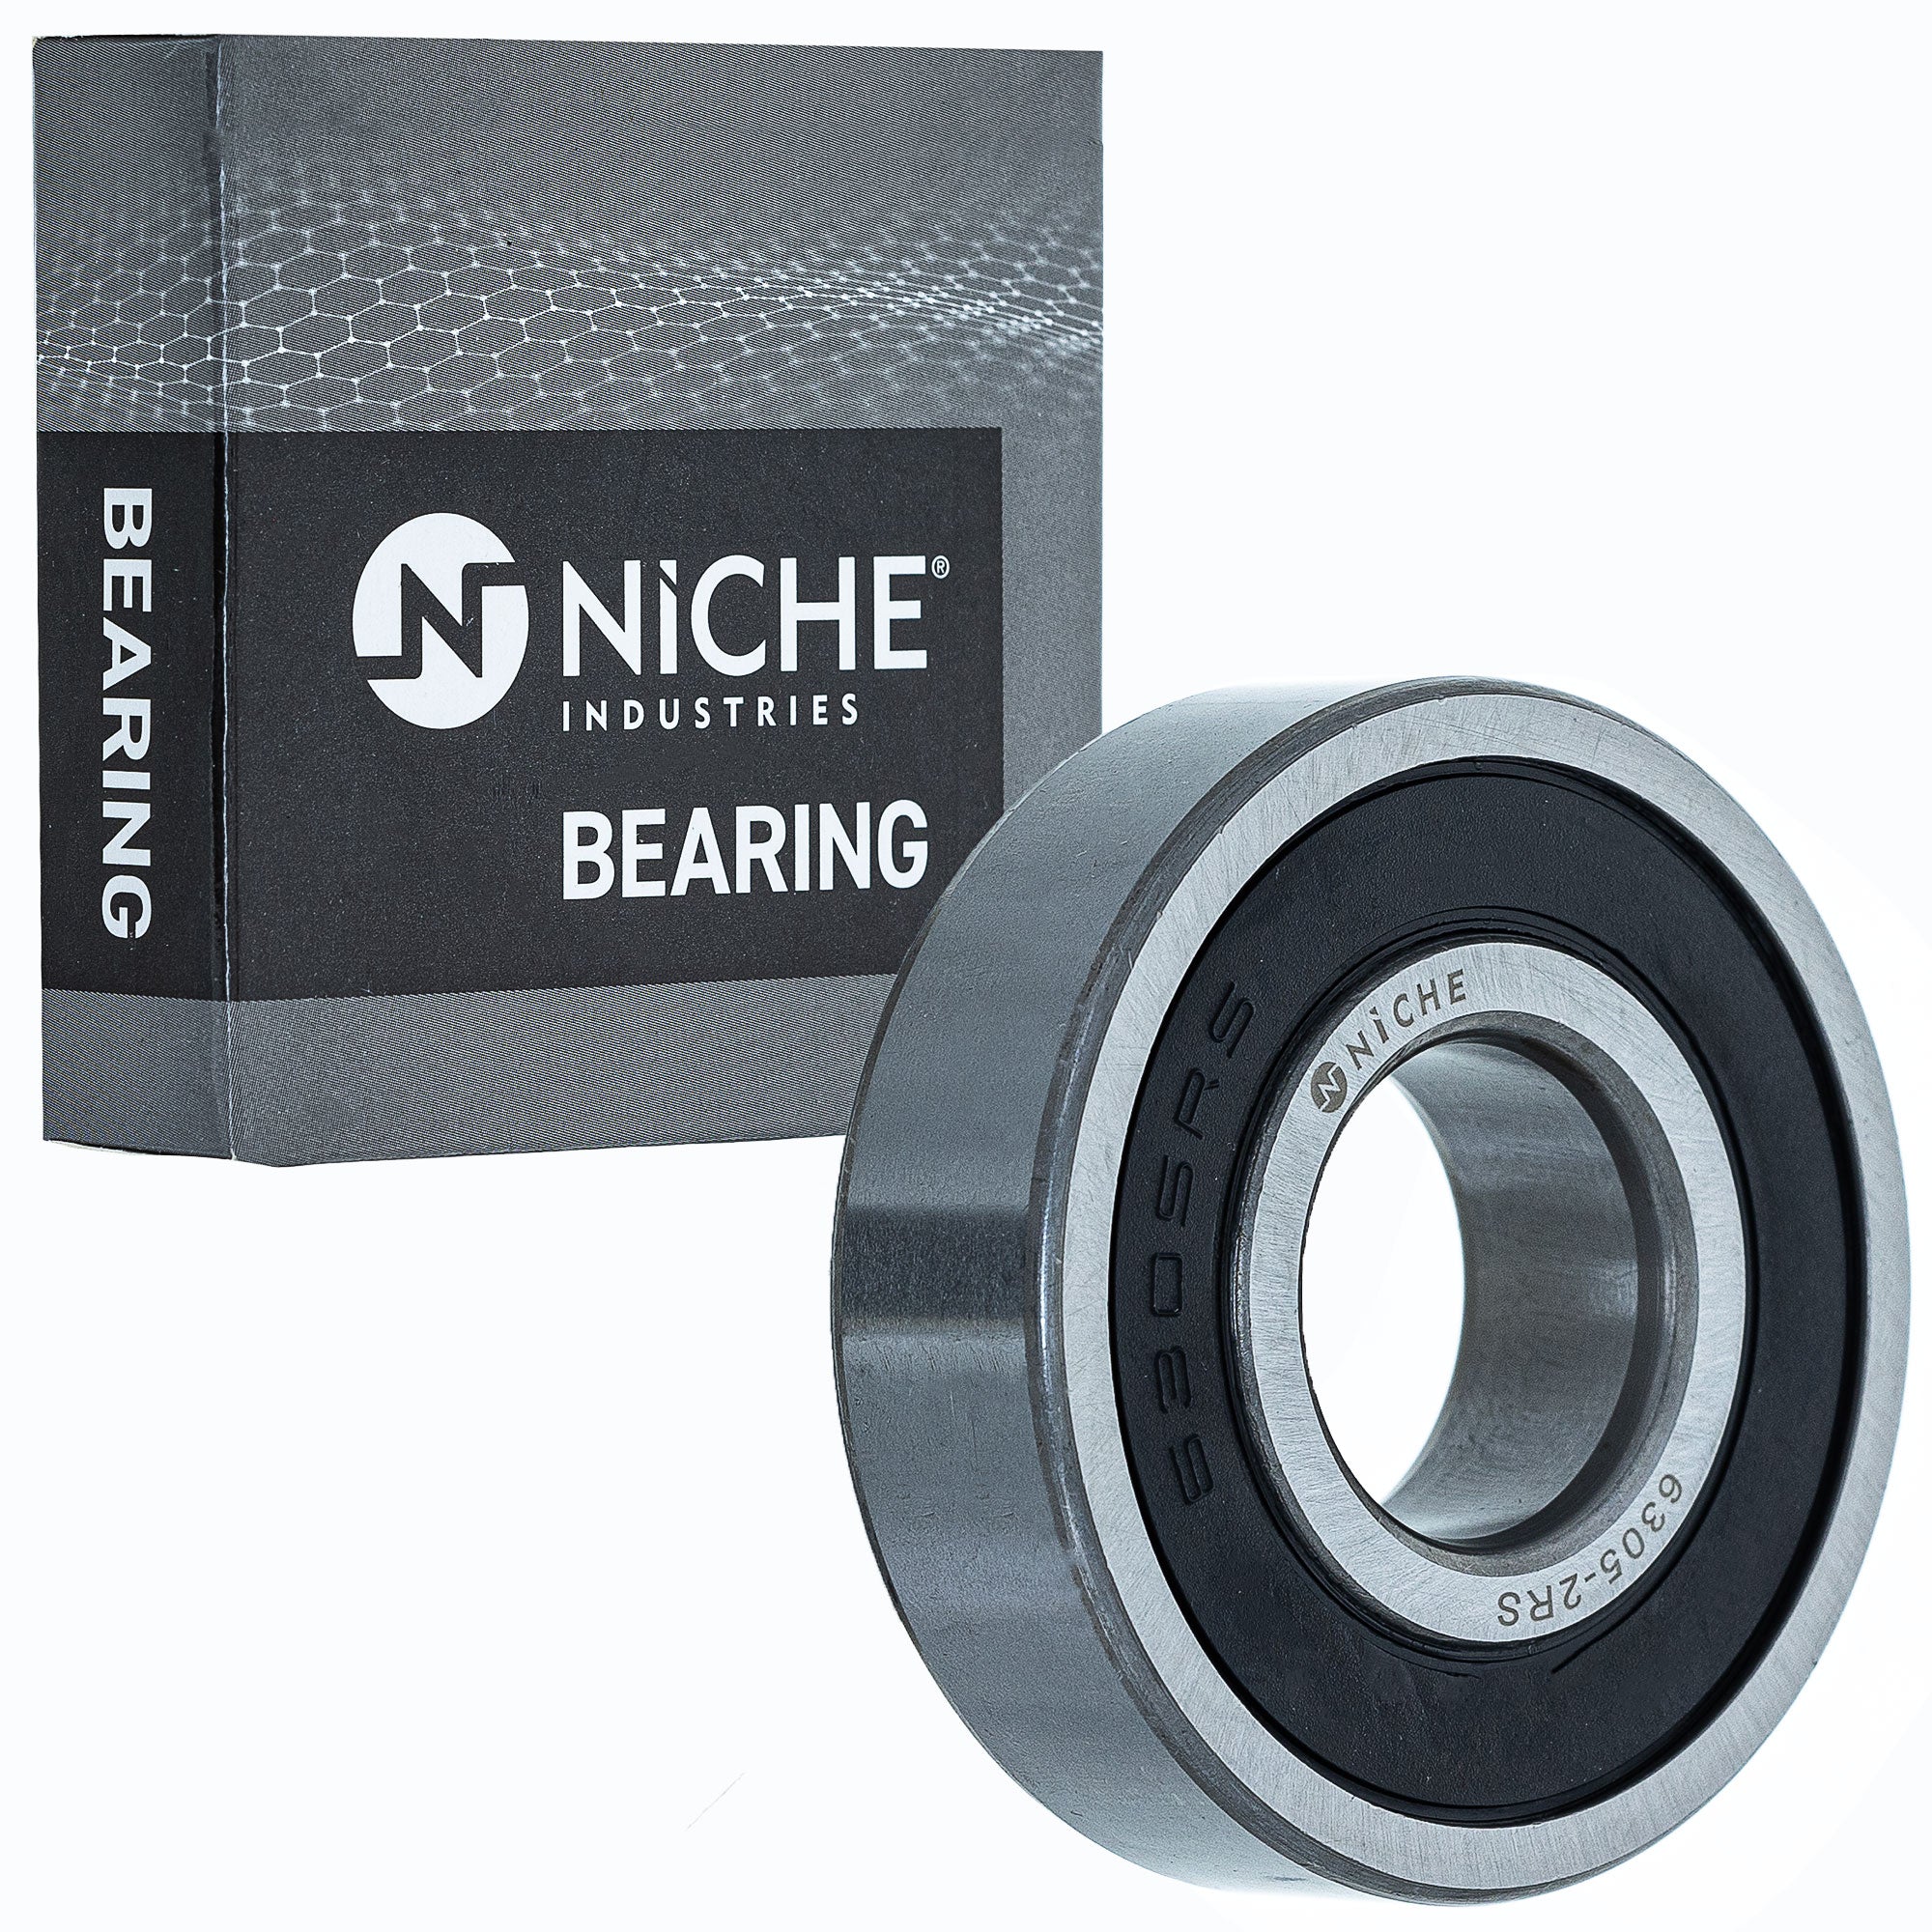 NICHE 519-CBB2231R Bearing for zOTHER YAZOO-KEES Wright Stander